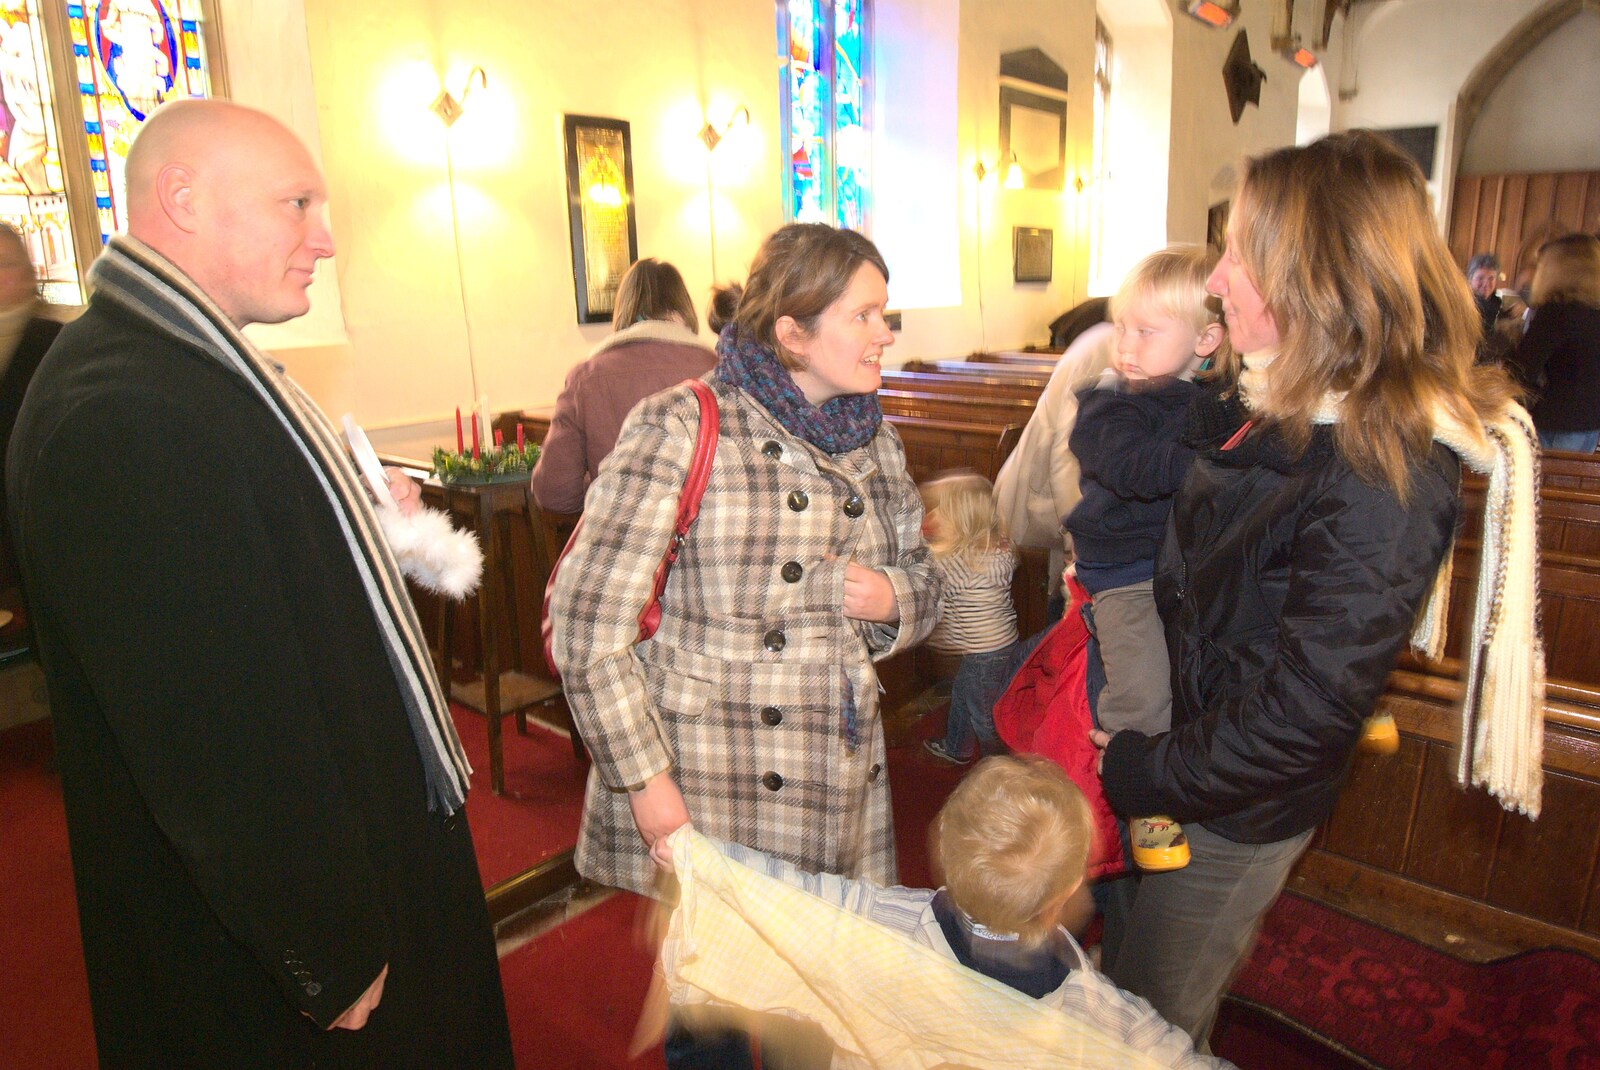 Gov, Isobel, Oak and Martina from Fred's First Nativity, St. Peter's Church, Palgrave, Suffolk - 8th December 2011